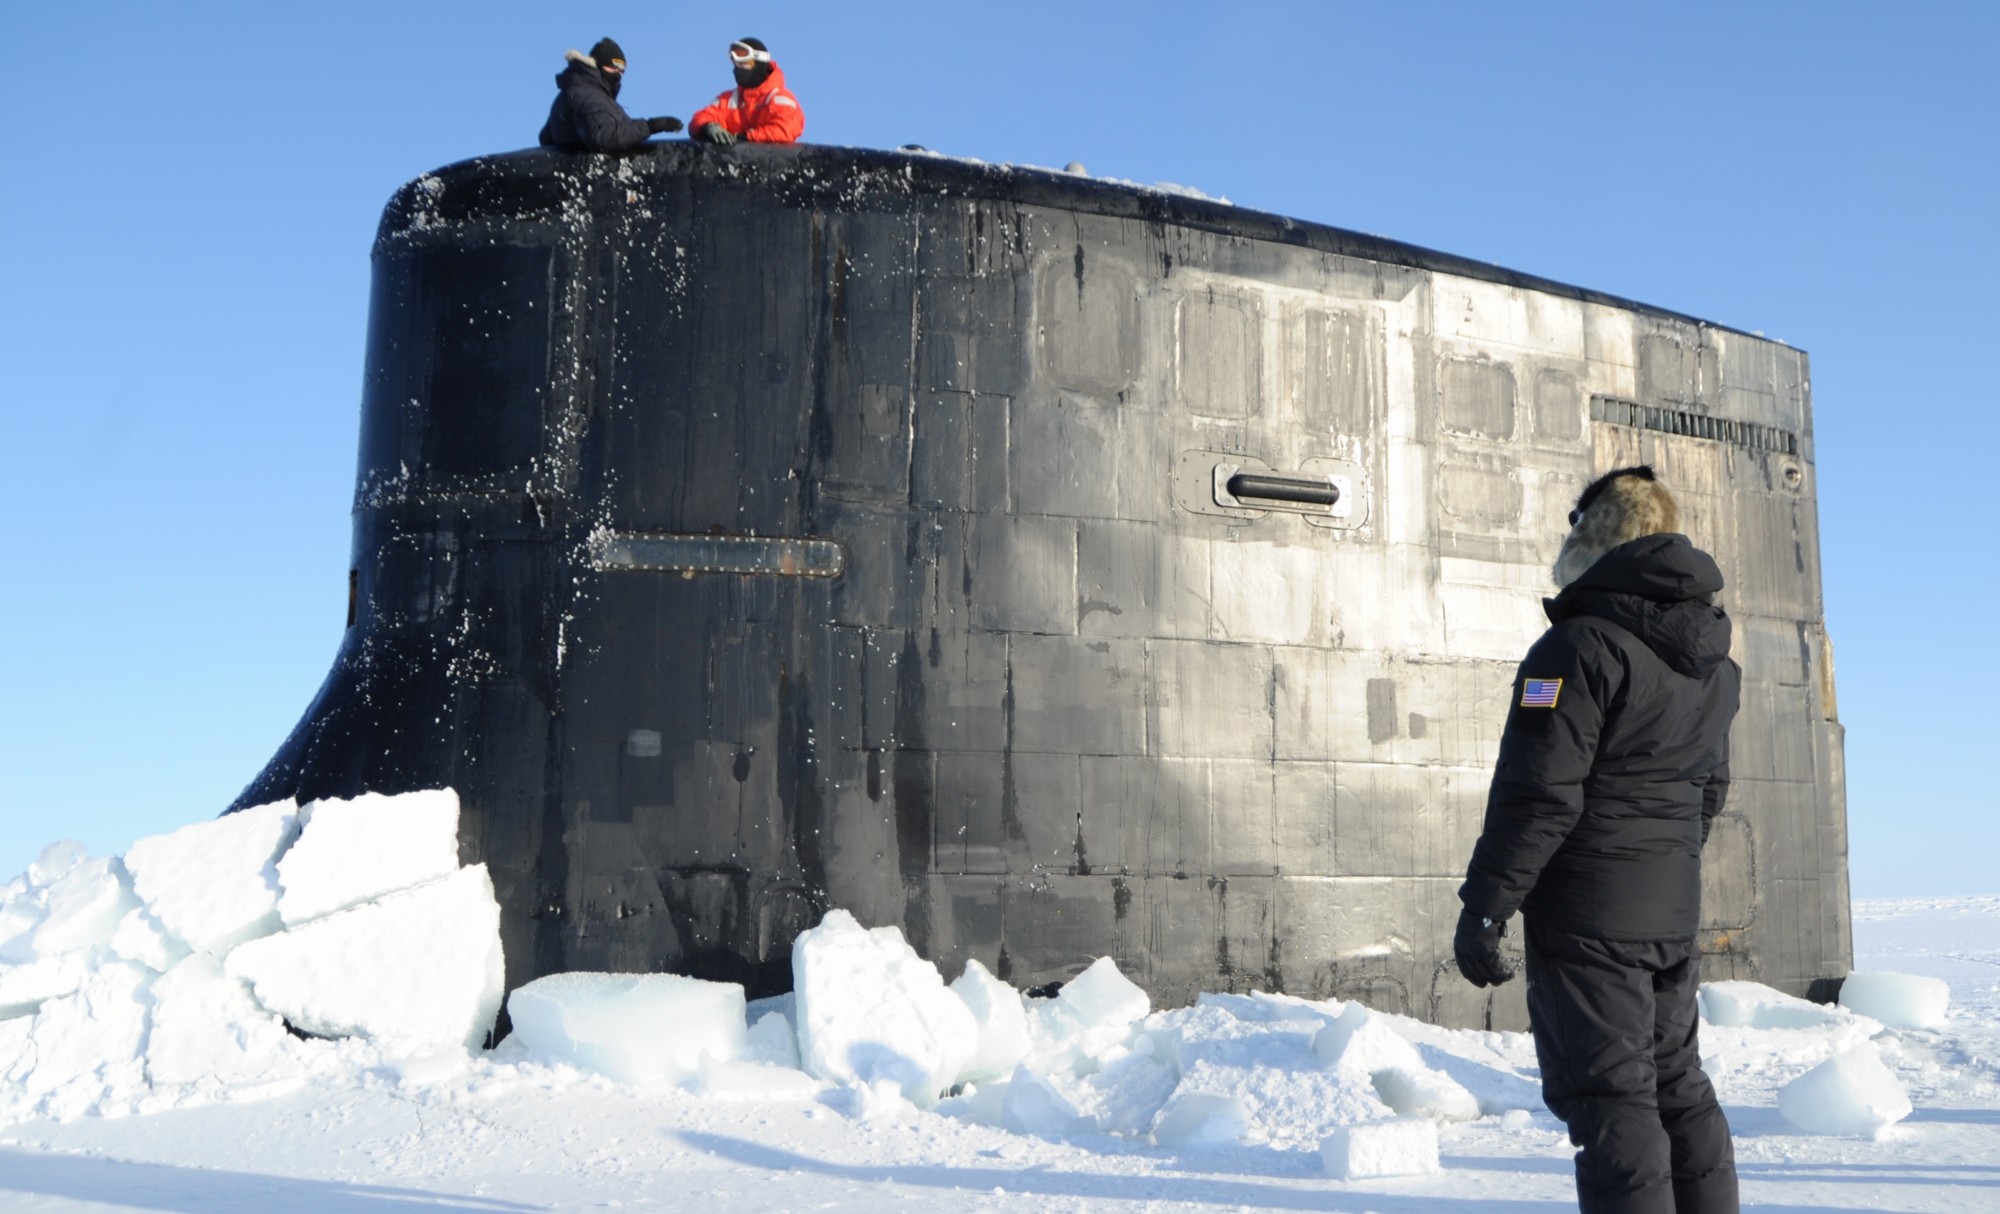 ssn-22 uss connecticut seawolf class attack submarine us navy exercise icex 18 arctic ocean 39 surfacing